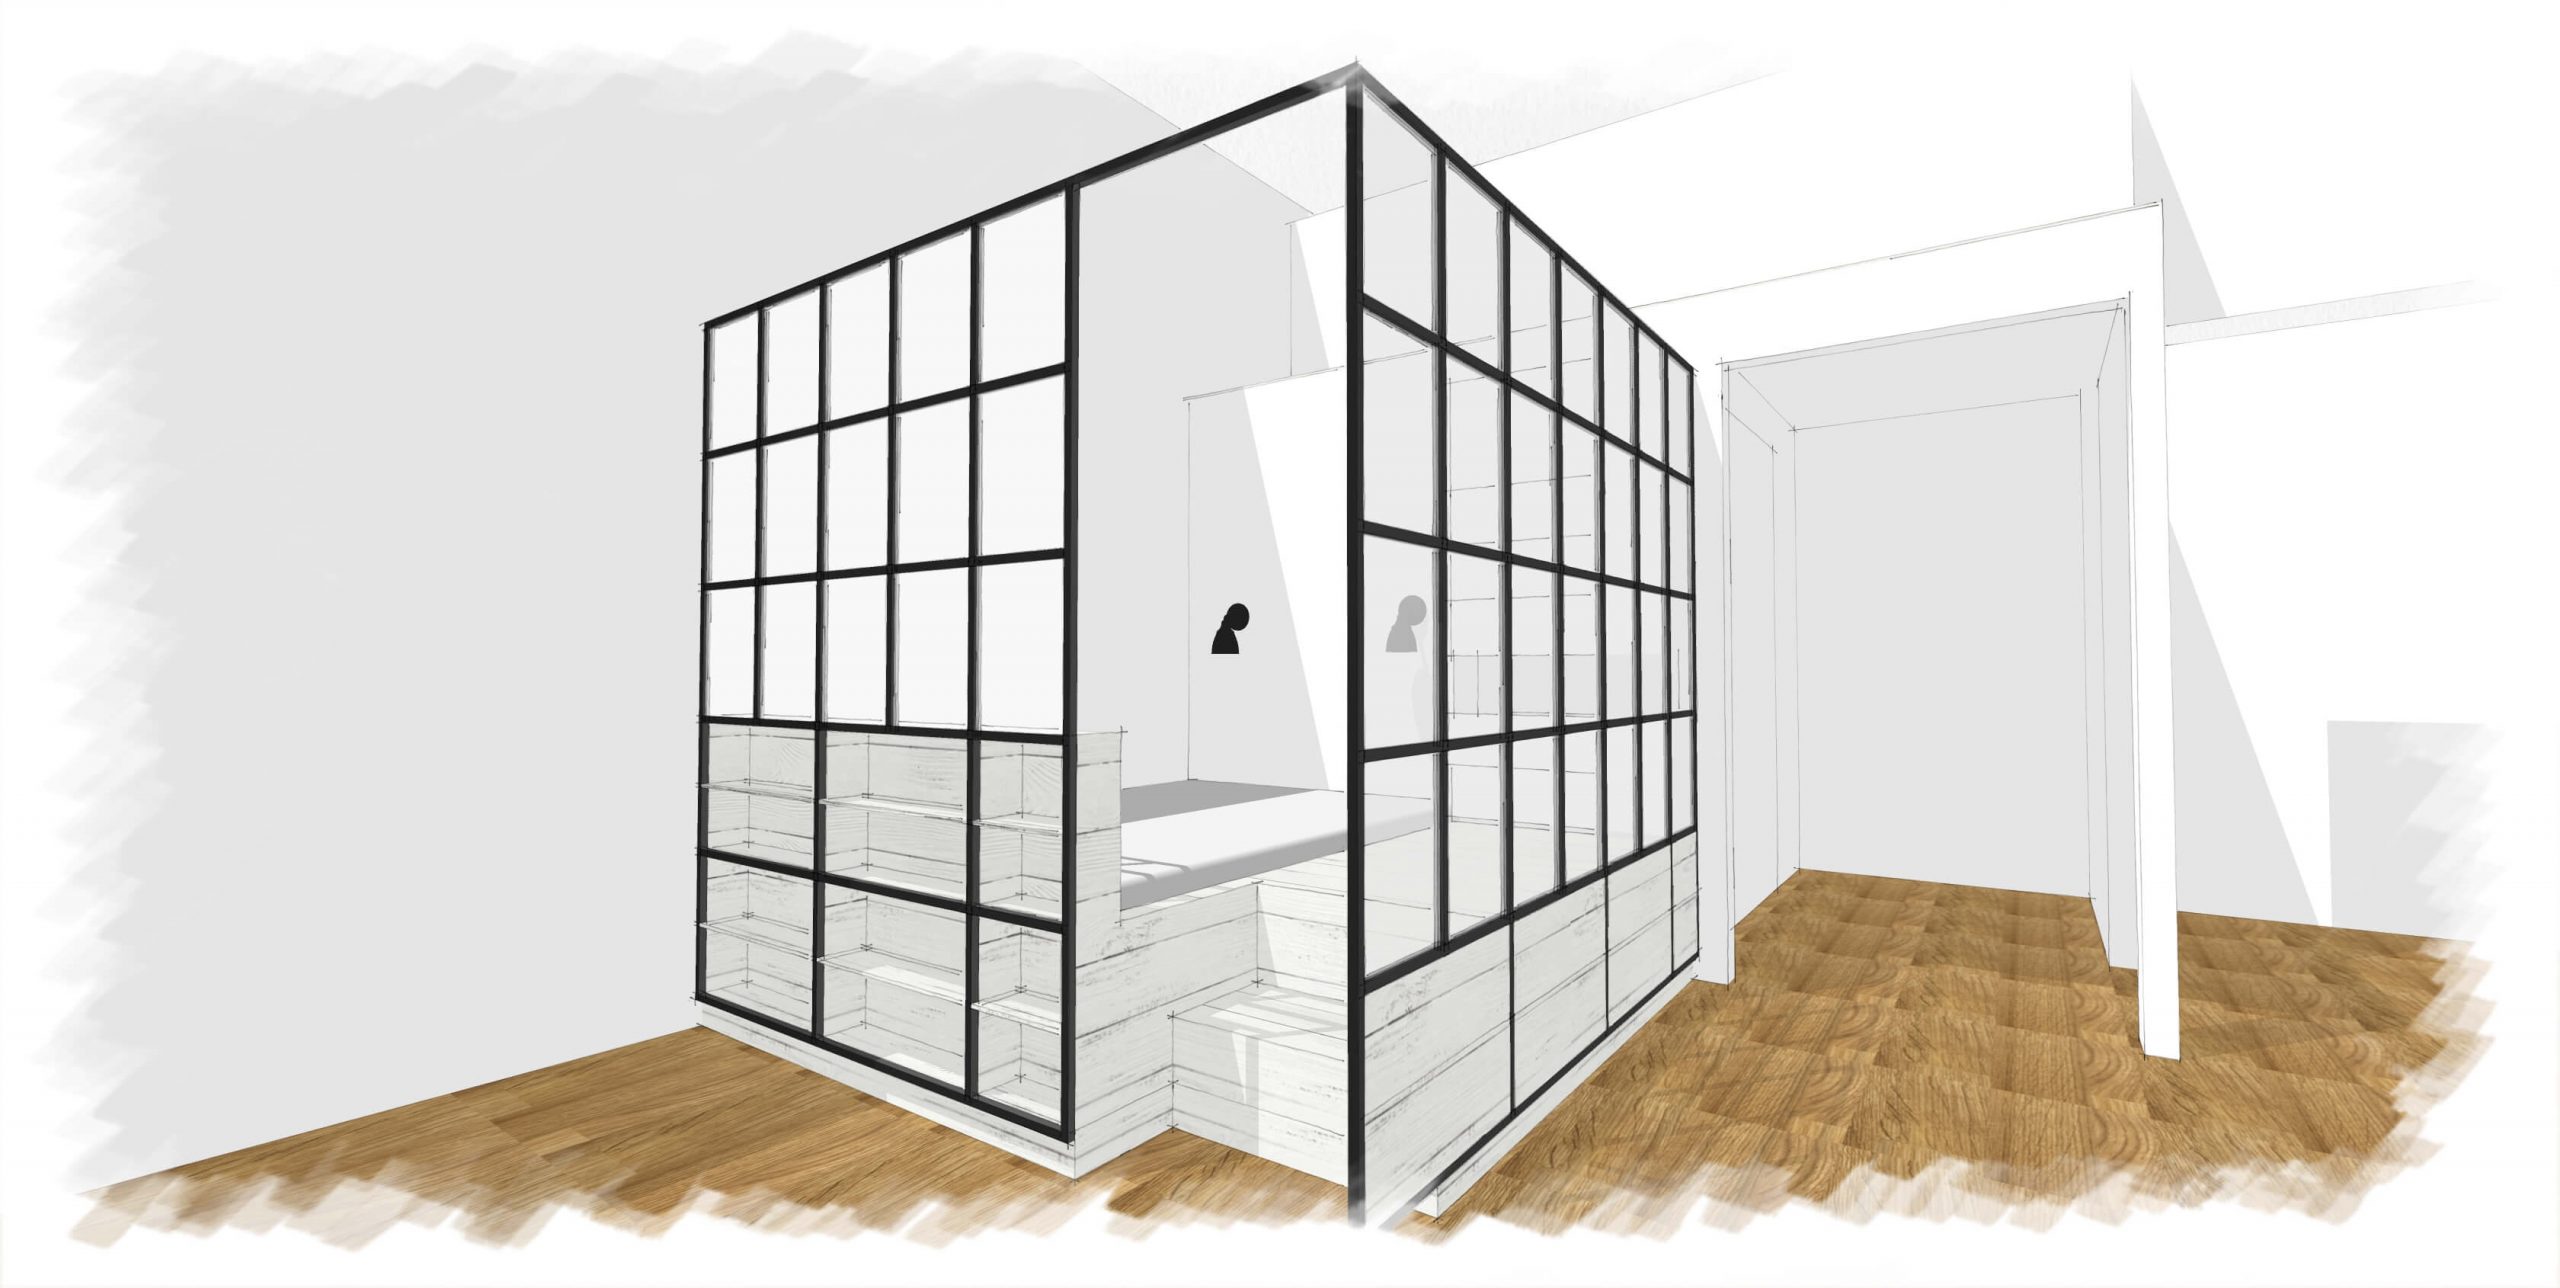 Torvits-Trench-LDN-Residential-Interior-Design-Open-Plan-Living-Bedroom-Storage-Bespoke-Joinery-Sketch-Visual